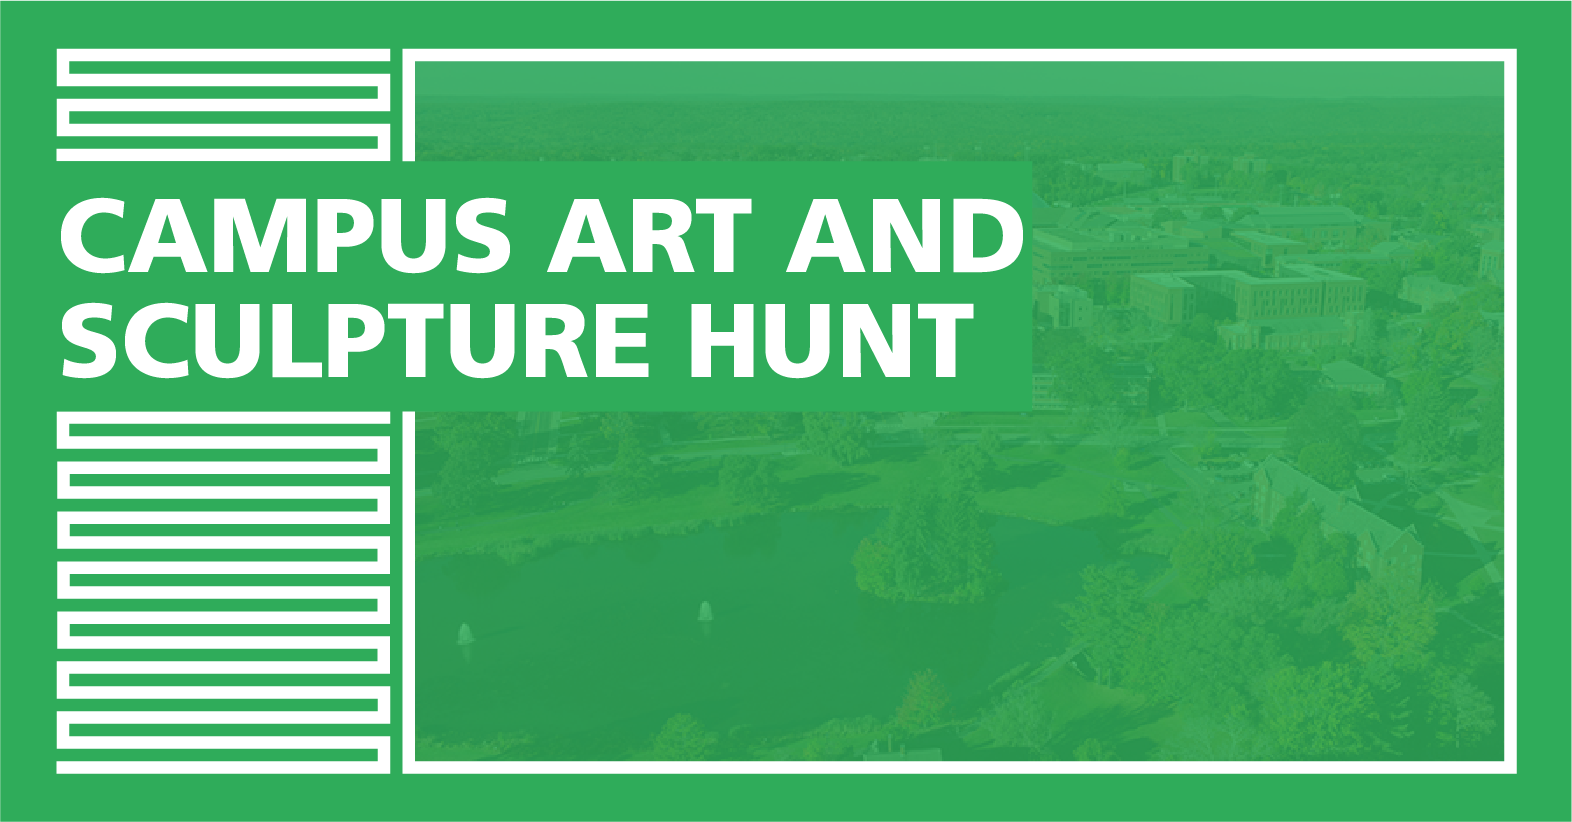 Cover Image for "Campus Art and Sculpture Hunt"